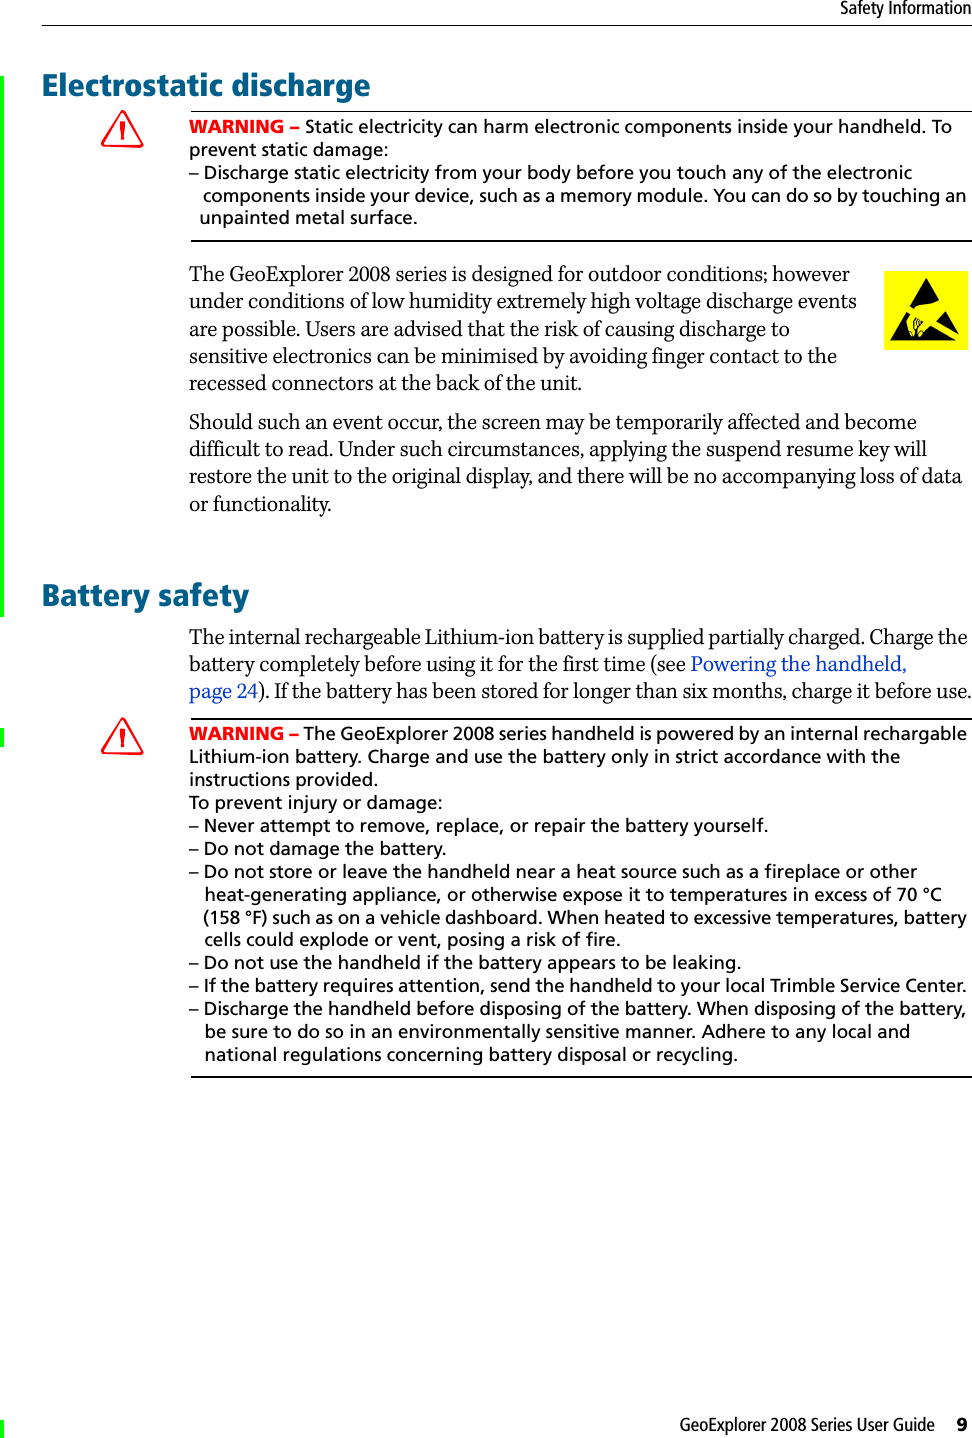 GeoExplorer 2008 Series User Guide     9Safety InformationElectrostatic dischargeCWARNING – Static electricity can harm electronic components inside your handheld. To prevent static damage:– Discharge static electricity from your body before you touch any of the electronic   components inside your device, such as a memory module. You can do so by touching an   unpainted metal surface.The GeoExplorer 2008 series is designed for outdoor conditions; however under conditions of low humidity extremely high voltage discharge events are possible. Users are advised that the risk of causing discharge to sensitive electronics can be minimised by avoiding finger contact to the recessed connectors at the back of the unit.Should such an event occur, the screen may be temporarily affected and become difficult to read. Under such circumstances, applying the suspend resume key will restore the unit to the original display, and there will be no accompanying loss of data or functionality. Battery safetyThe internal rechargeable Lithium-ion battery is supplied partially charged. Charge the battery completely before using it for the first time (see Powering the handheld, page 24). If the battery has been stored for longer than six months, charge it before use.CWARNING – The GeoExplorer 2008 series handheld is powered by an internal rechargable Lithium-ion battery. Charge and use the battery only in strict accordance with the instructions provided. To prevent injury or damage:– Never attempt to remove, replace, or repair the battery yourself. – Do not damage the battery.– Do not store or leave the handheld near a heat source such as a fireplace or other    heat-generating appliance, or otherwise expose it to temperatures in excess of 70 °C    (158 °F) such as on a vehicle dashboard. When heated to excessive temperatures, battery    cells could explode or vent, posing a risk of fire. – Do not use the handheld if the battery appears to be leaking. – If the battery requires attention, send the handheld to your local Trimble Service Center. – Discharge the handheld before disposing of the battery. When disposing of the battery,    be sure to do so in an environmentally sensitive manner. Adhere to any local and    national regulations concerning battery disposal or recycling.